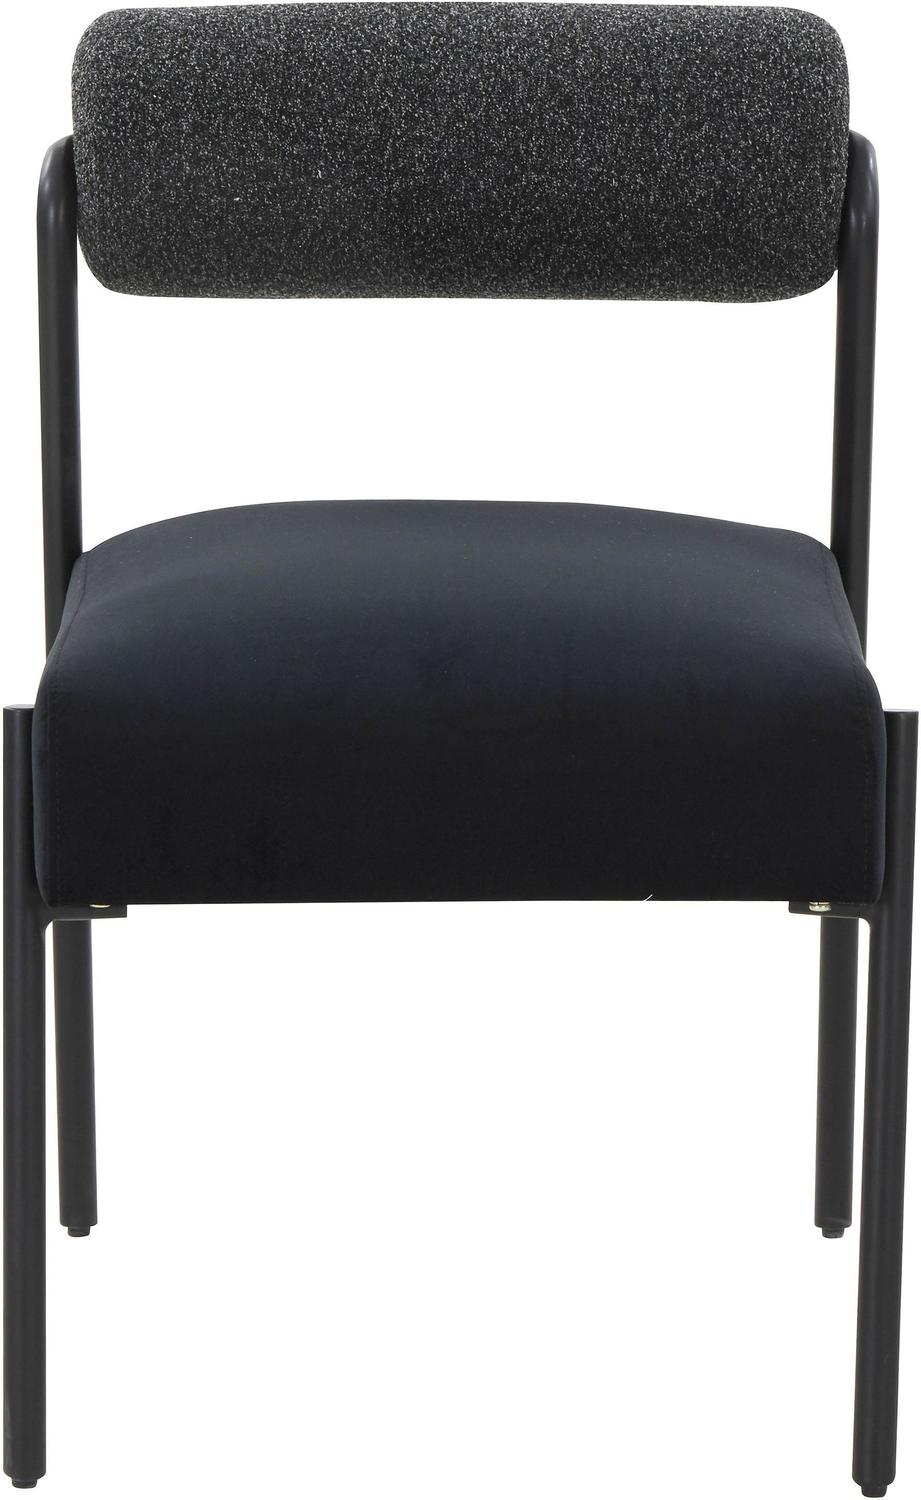 modern kitchen dining chairs Contemporary Design Furniture Dining Chairs Black